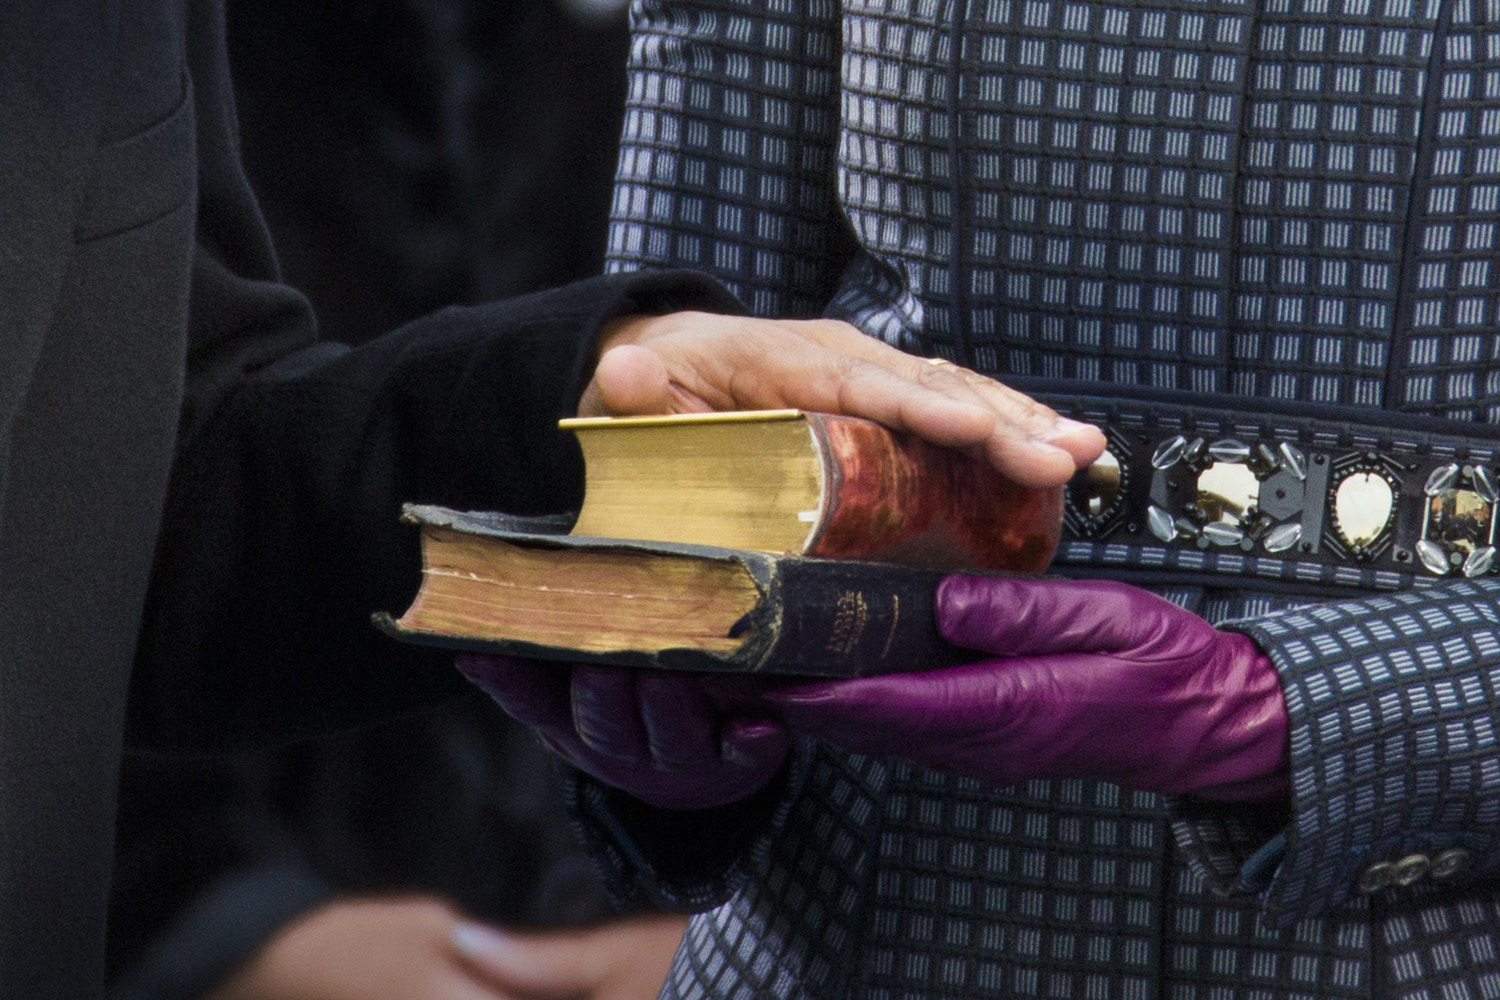 U.S. President Barack Obama places his hand on two bibles as held by first lady Michelle Obama as his recites the oath of office during swearing-in ceremonies on the West front of the U.S Capitol in Washington.  The first is the Bible used by former President Abraham Lincoln,  when he took the oath of office in 1861.  The second Bible is the so-called "traveling Bible" used by slain civil rights leader Martin Luther King, Jr.